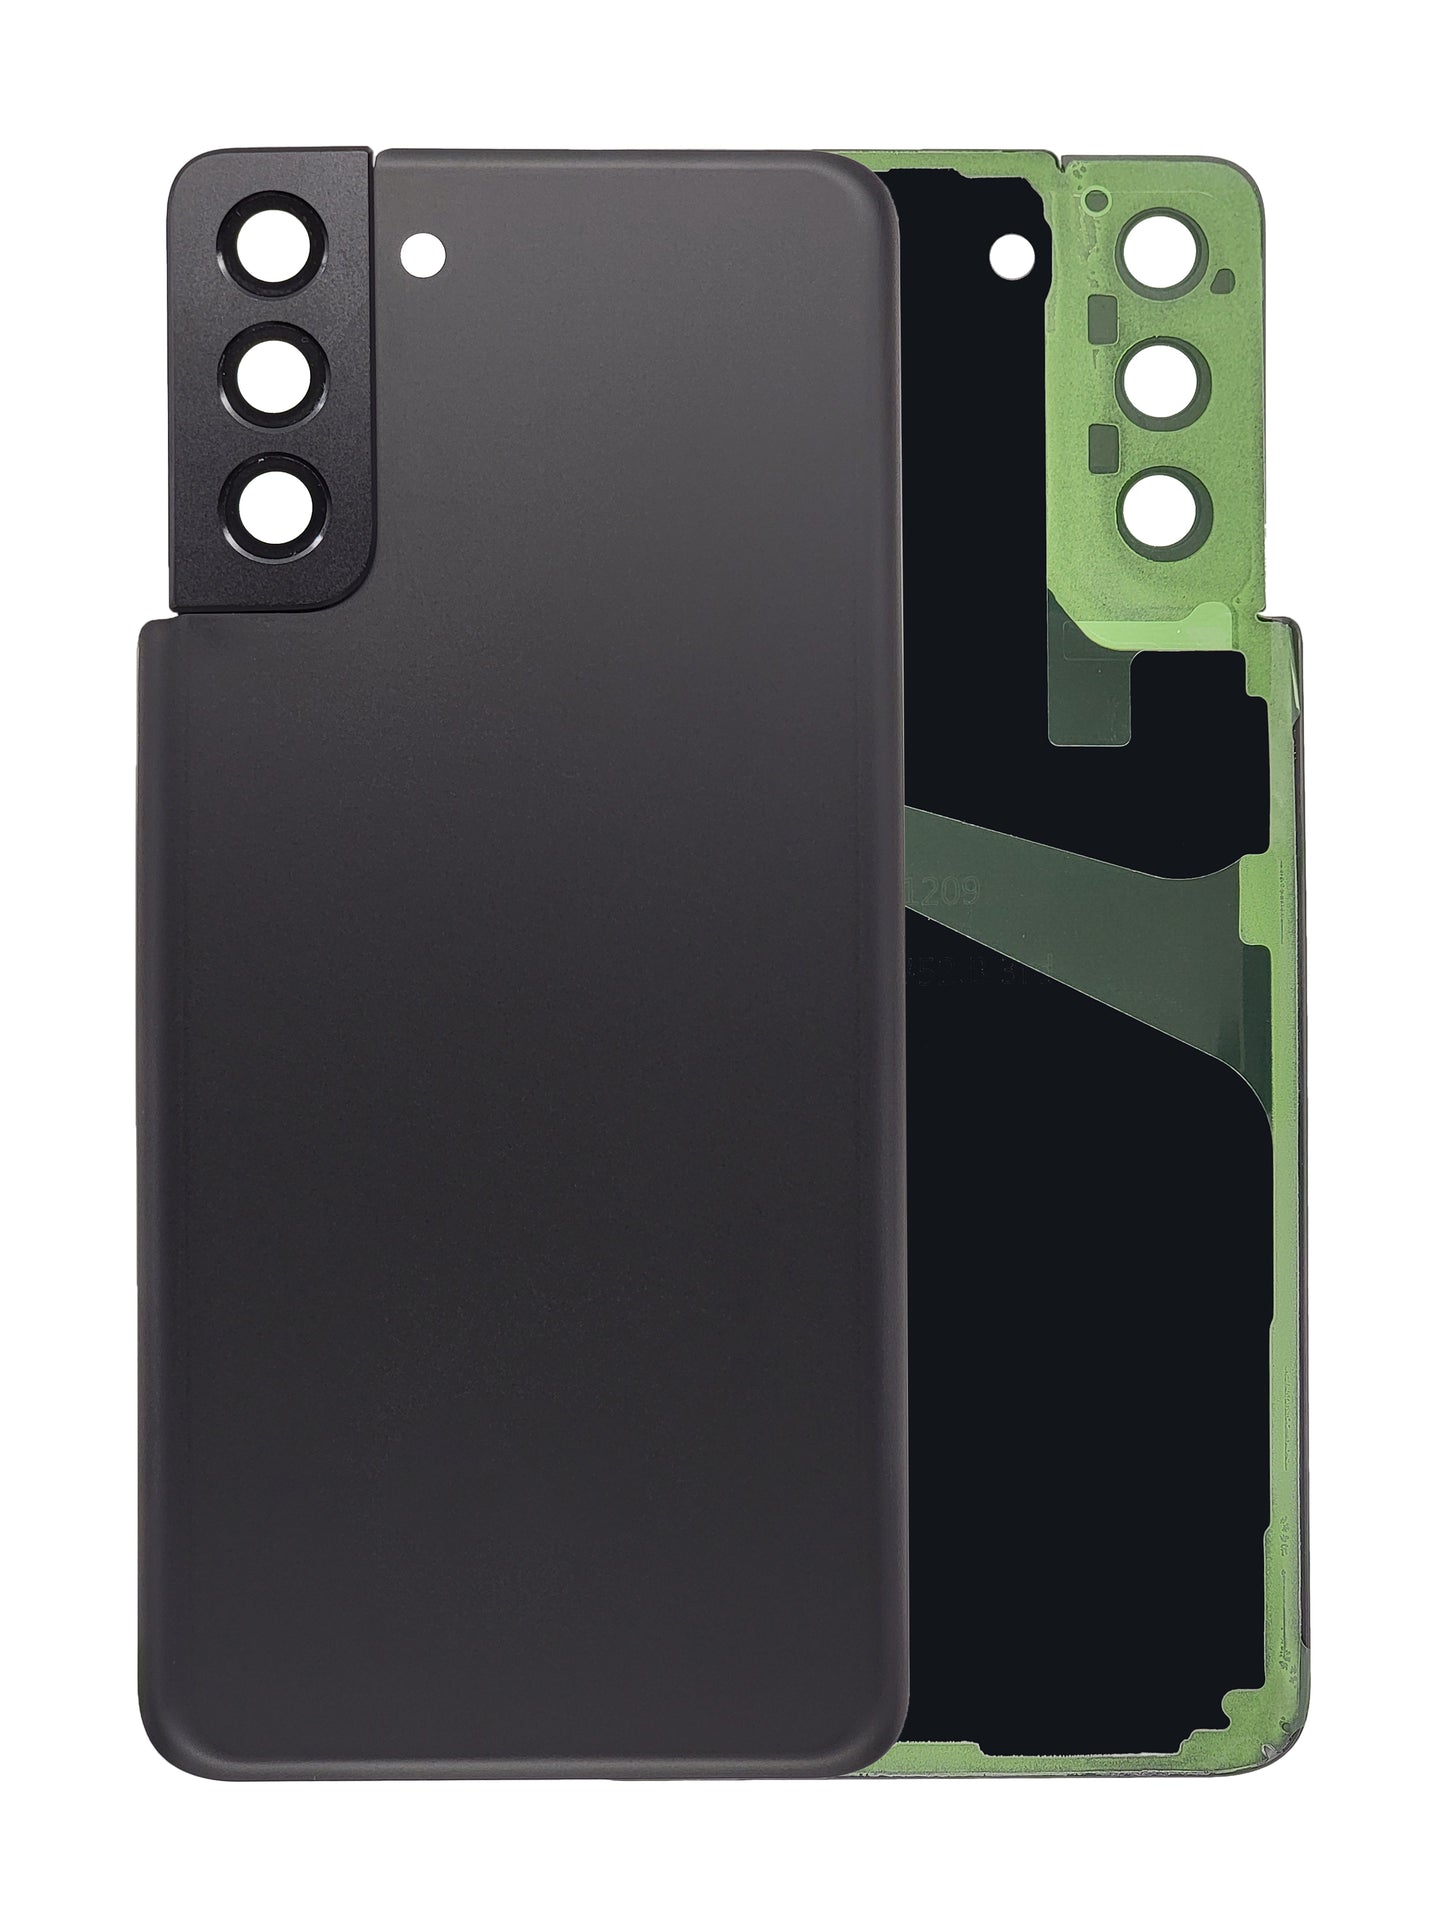 SGS S21 Plus Back Cover (Gray)